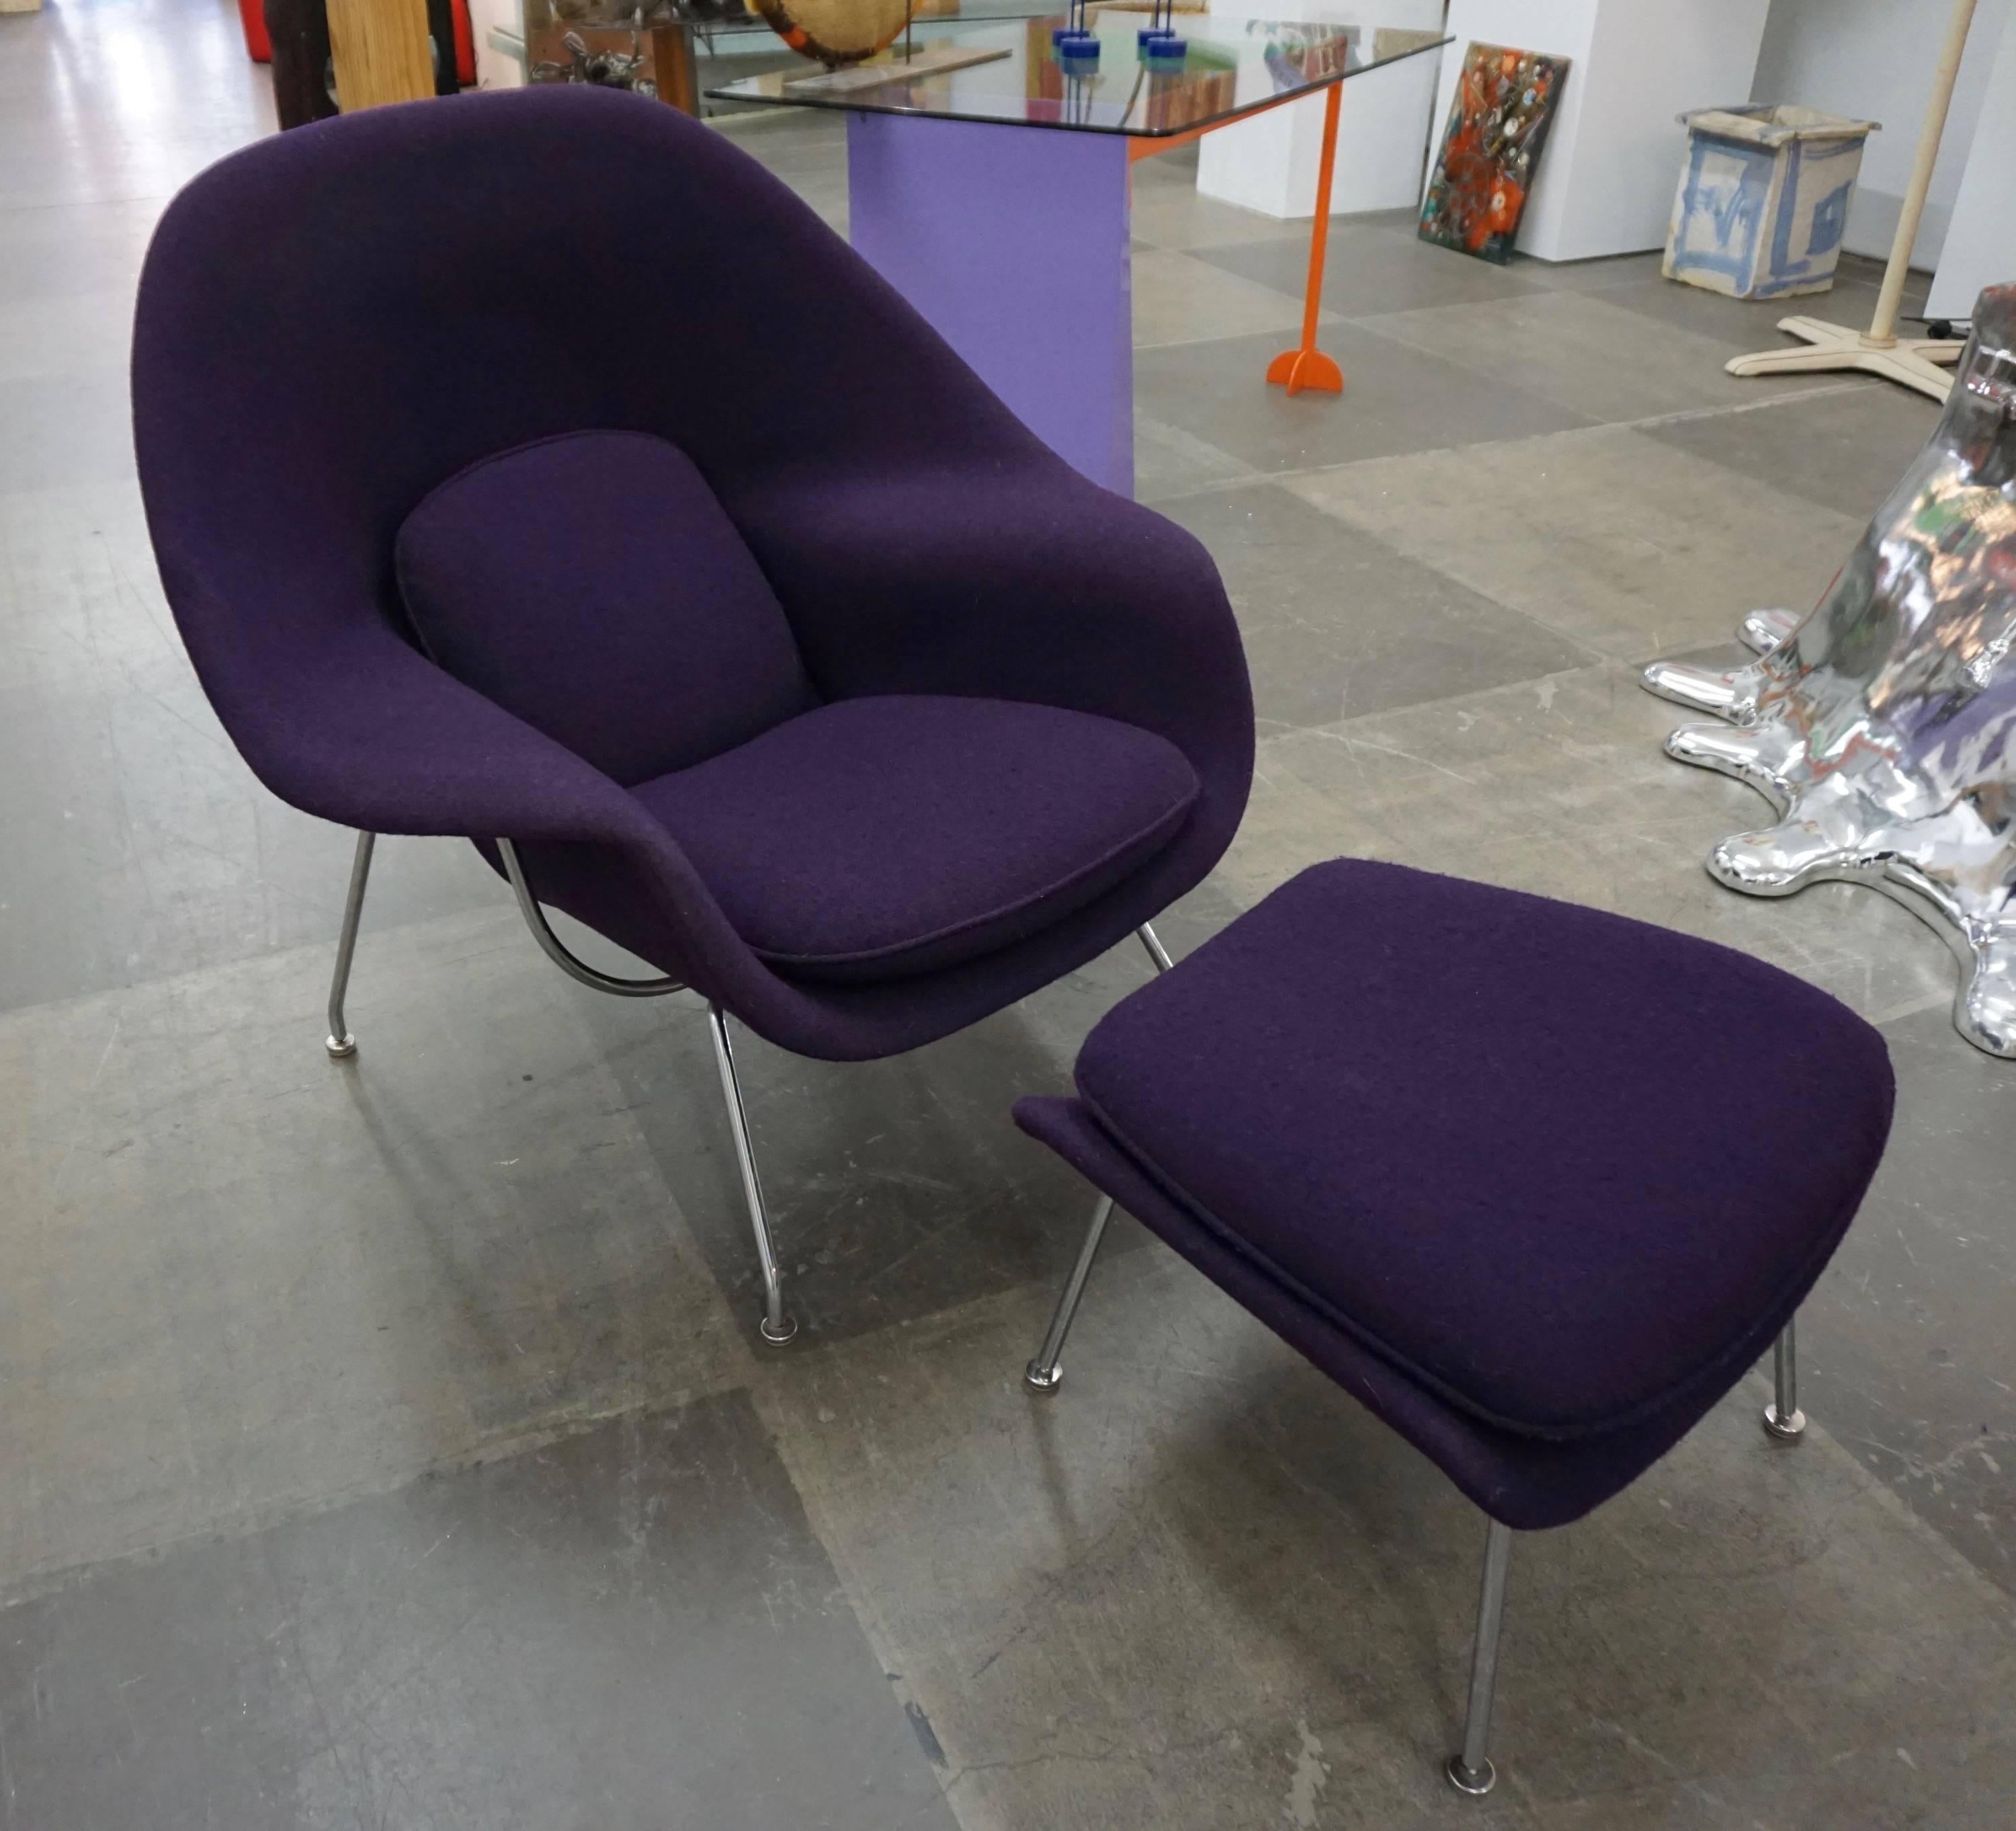 Designed by Saarinen for Knoll Intl. Upholstered in purple wool Knoll fabric with chrome-plated legs.
Three available, purple, red and black.
Ottoman measures 15